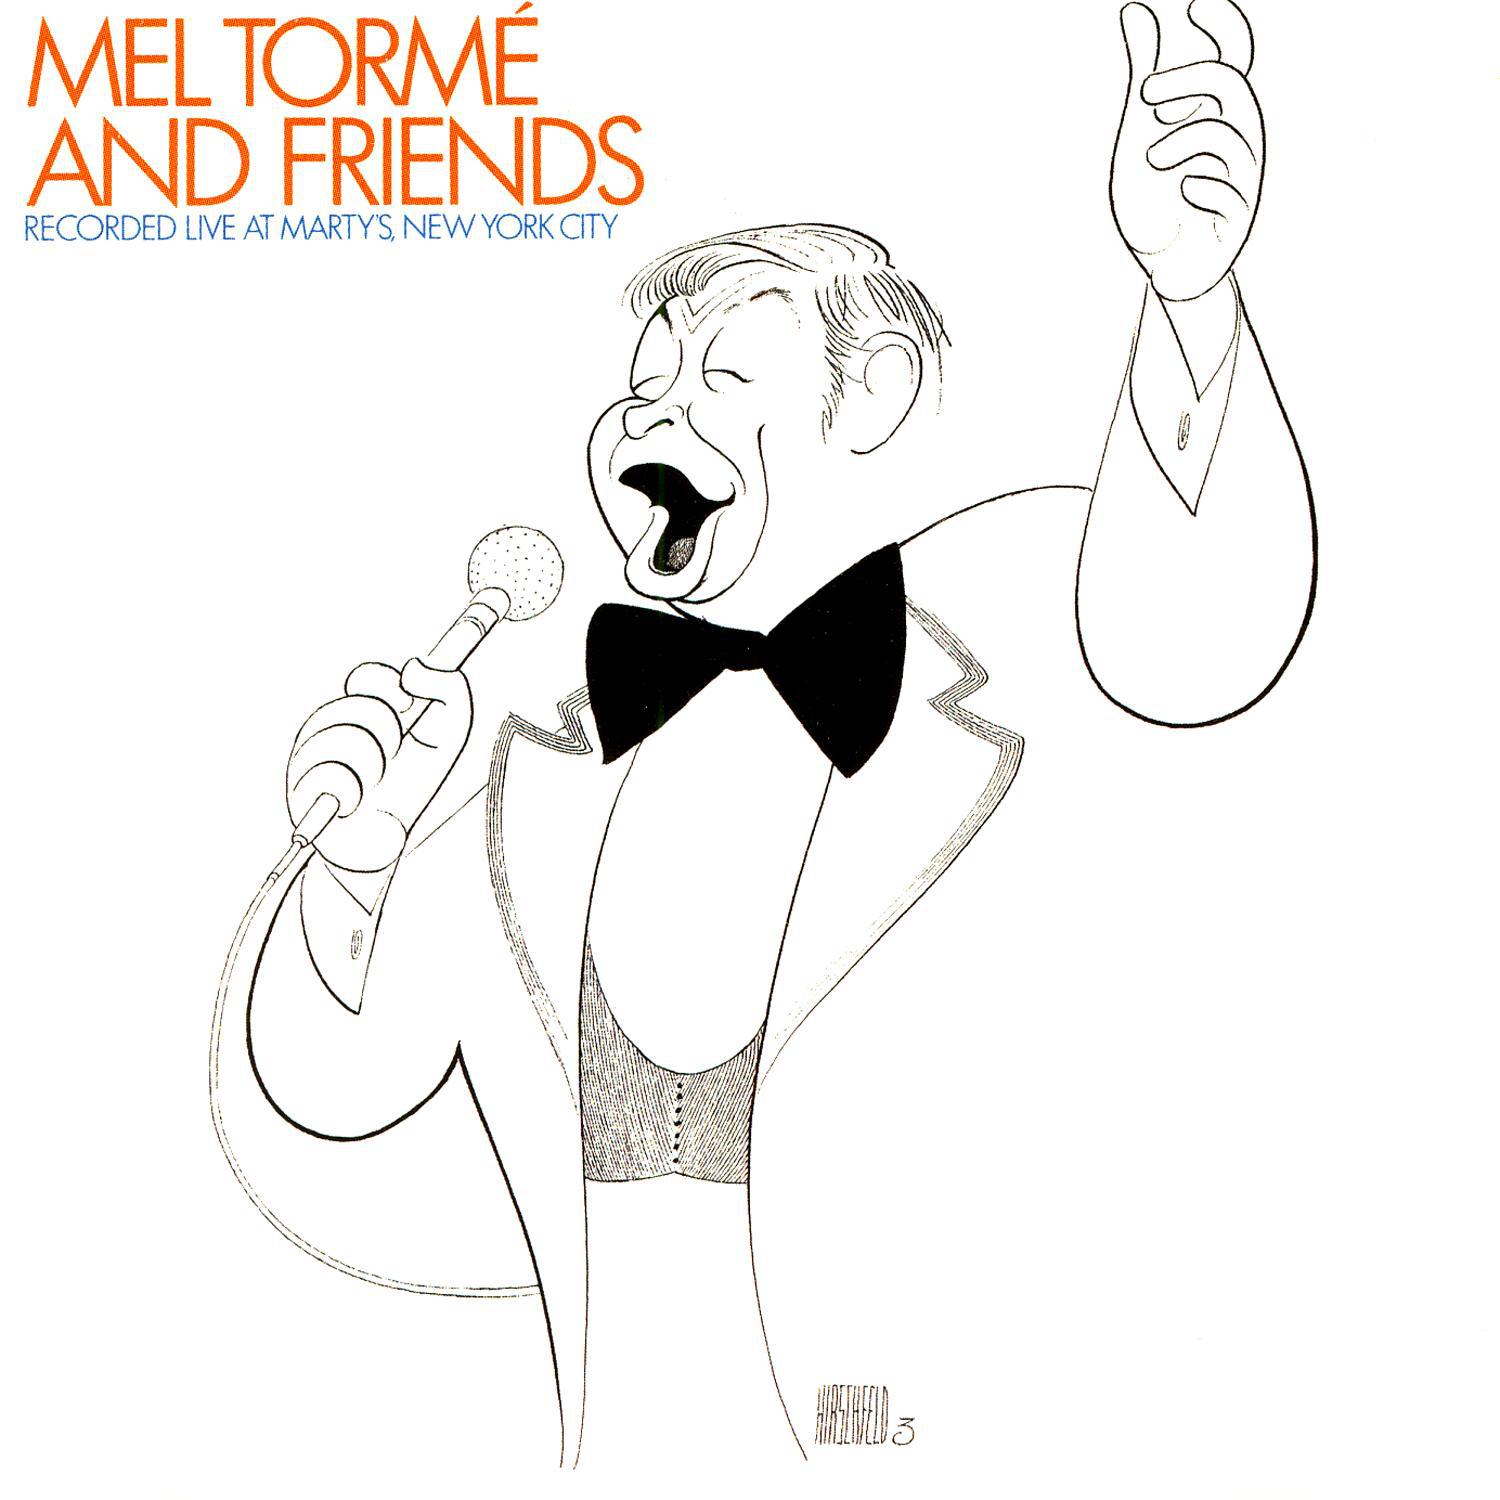 Mel Torme' And Friends